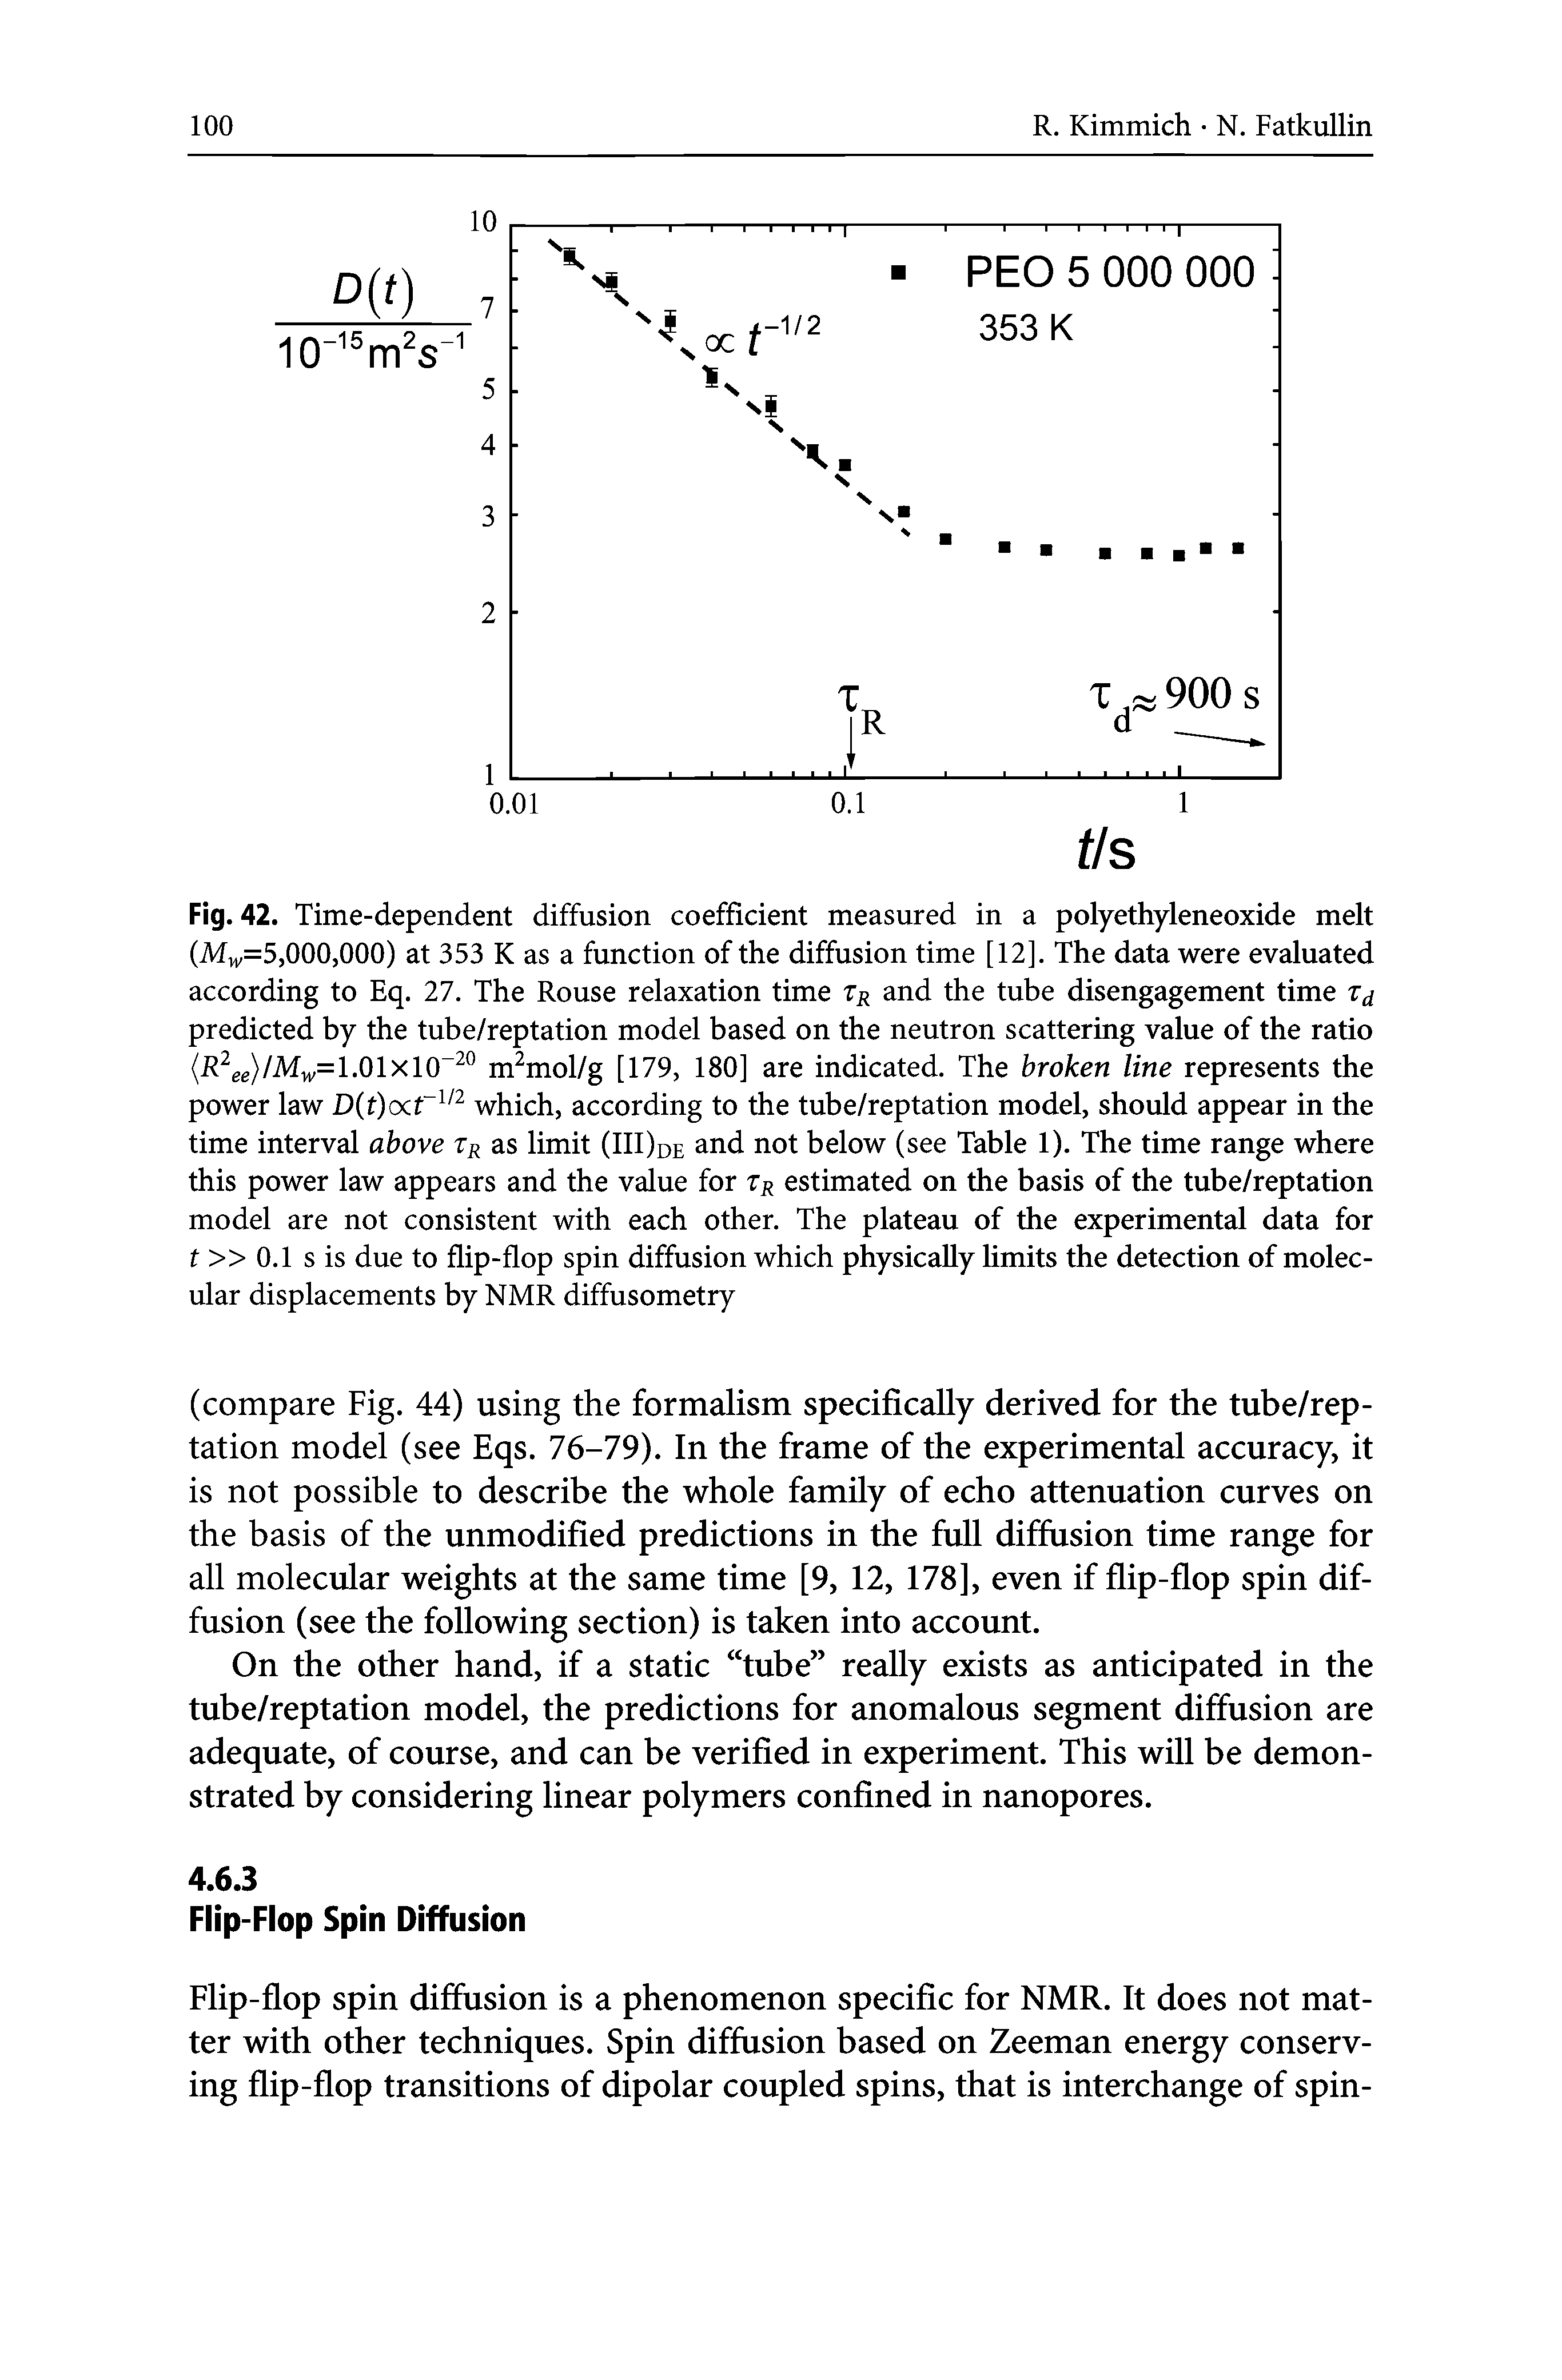 Fig. 42. Time-dependent diffusion coefficient measured in a polyethyleneoxide melt (M =5,000,000) at 353 K as a function of the diffusion time [12]. The data were evaluated according to Eq. 27. The Rouse relaxation time Tr and the tube disengagement time predicted by the tube/reptation model based on the neutron scattering value of the ratio (R ee)/M = 1.01x10 ° m mol/g [179, 180] are indicated. The broken line represents the power law D(t)(xr which, according to the tube/reptation model, should appear in the time interval above Tr as limit (III)de and not below (see Table 1). The time range where this power law appears and the value for Zr estimated on the basis of the tube/reptation model are not consistent with each other. The plateau of the experimental data for f 0.1 s is due to flip-flop spin diffusion which physically limits the detection of molecular displacements by NMR diffusometry...